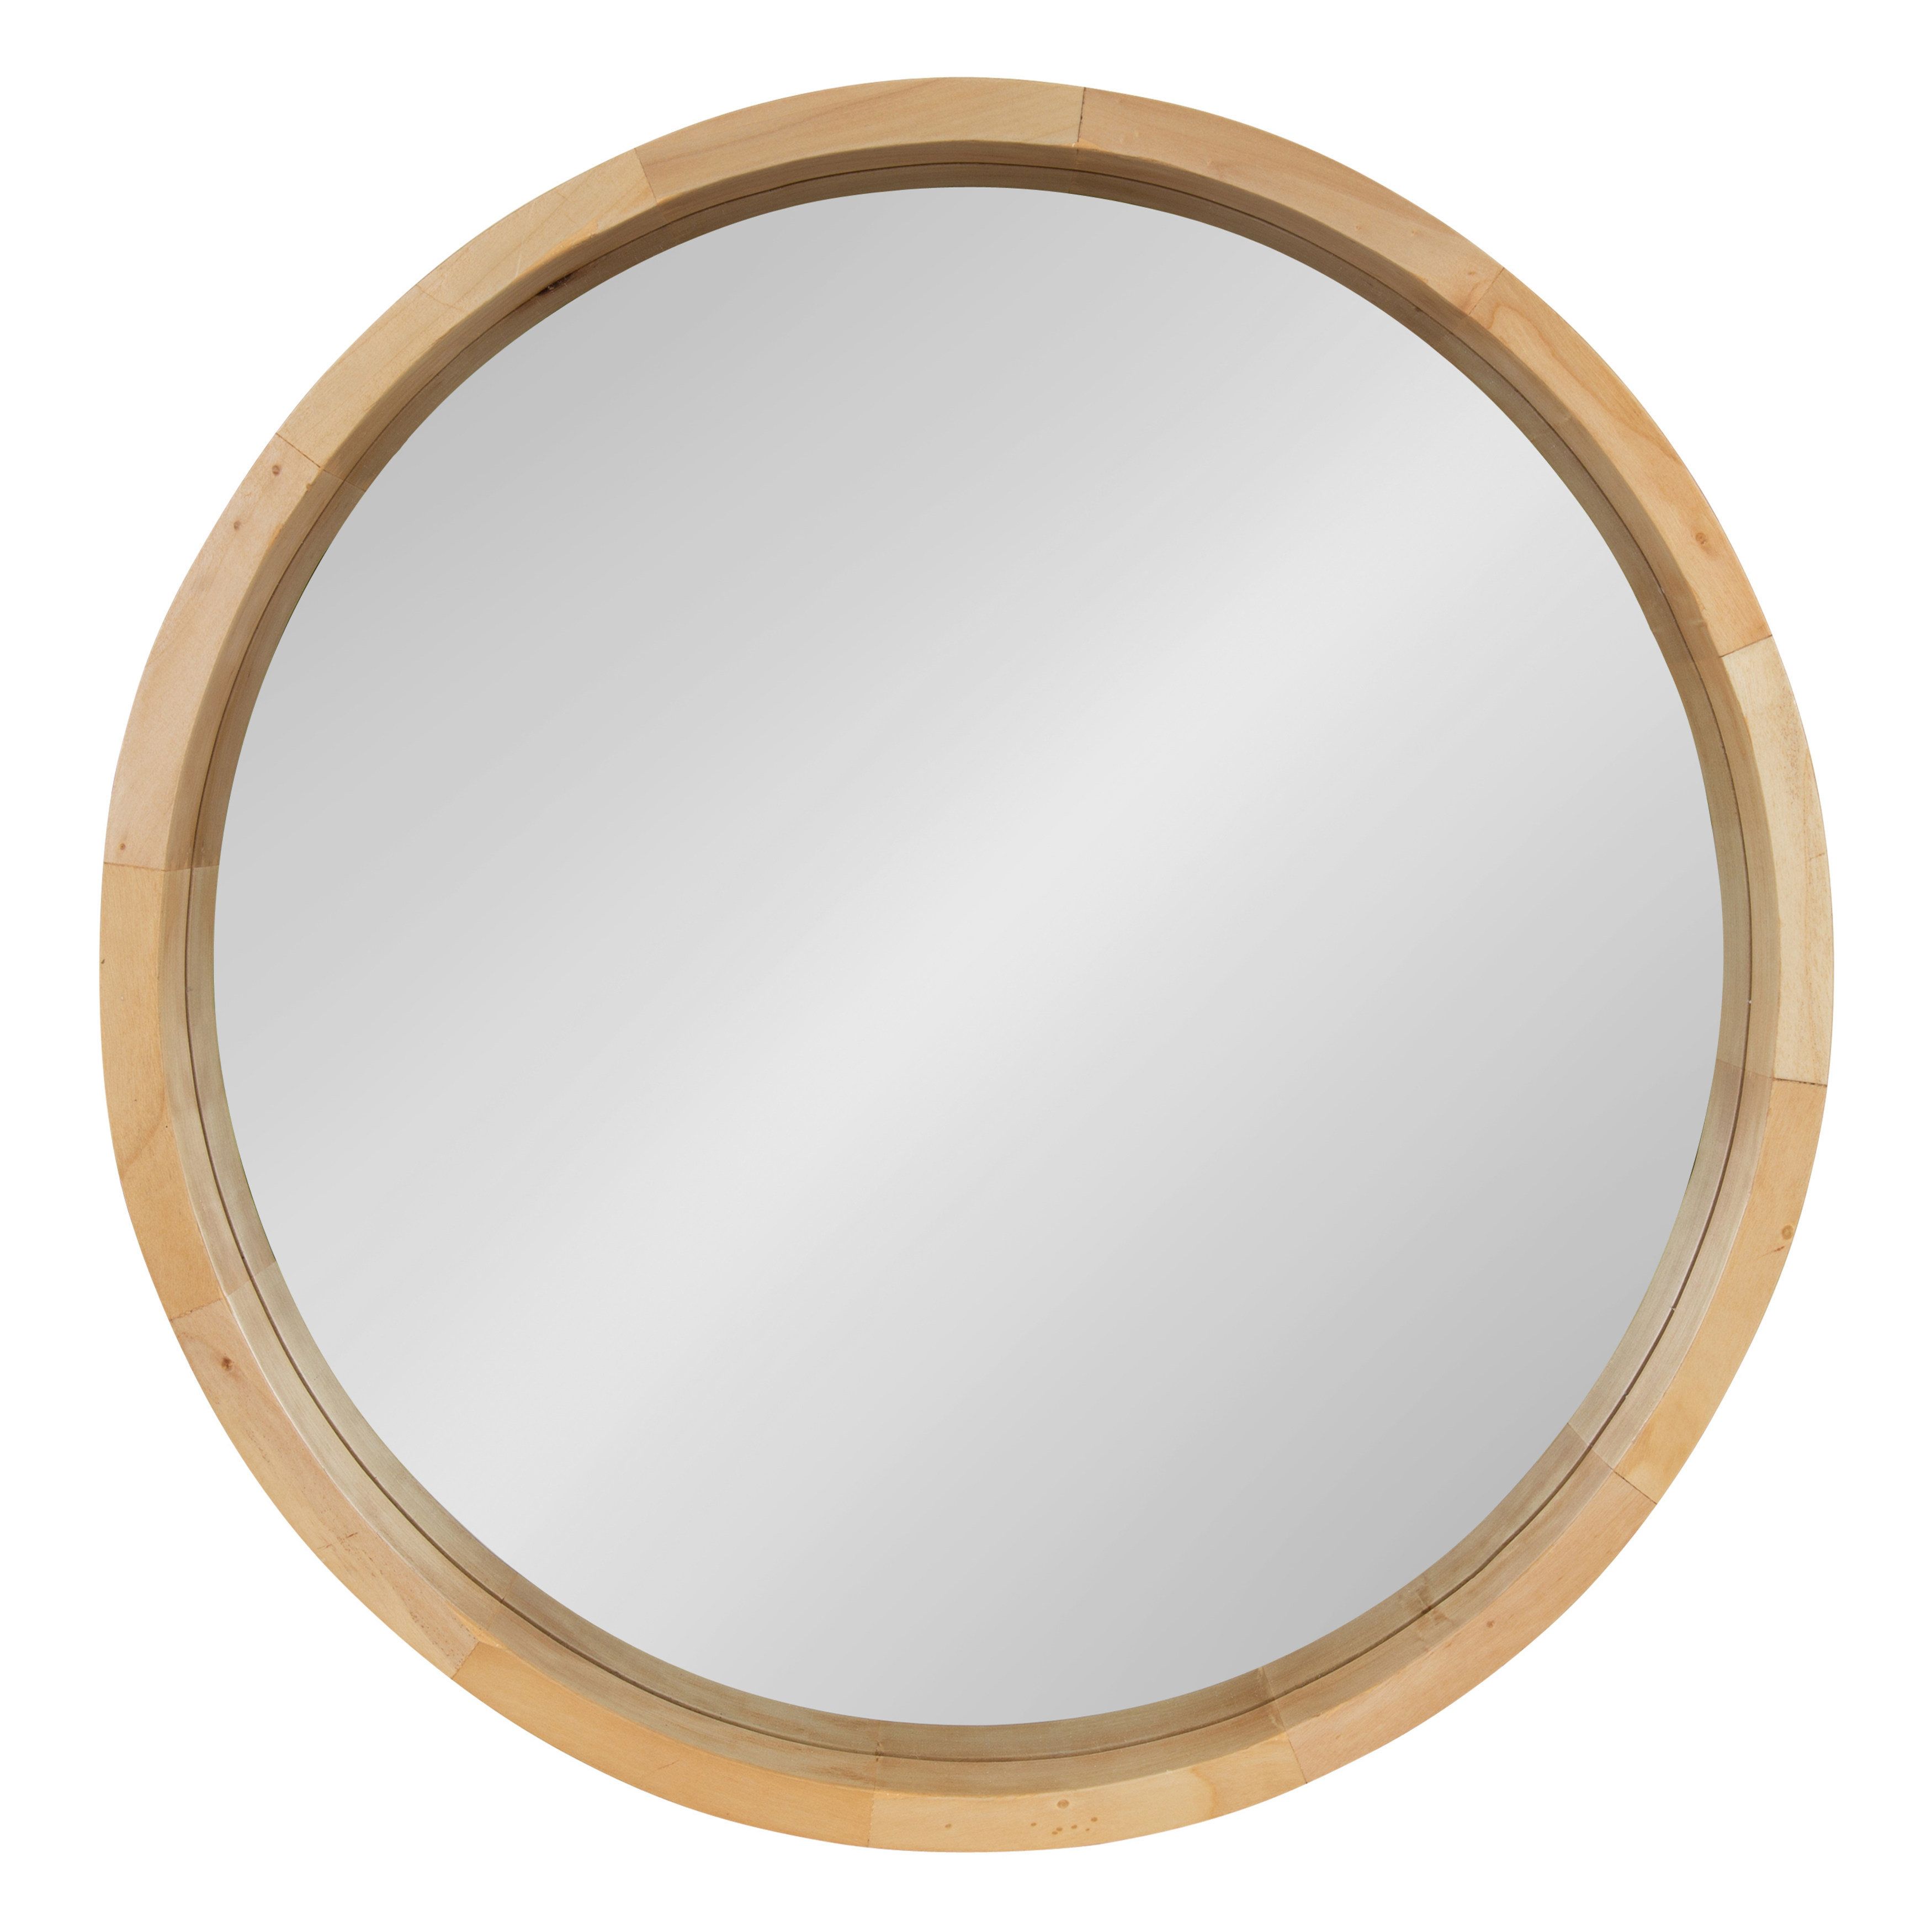 Accent Mirrors You'll Love In 2019 | Wayfair (View 16 of 30)